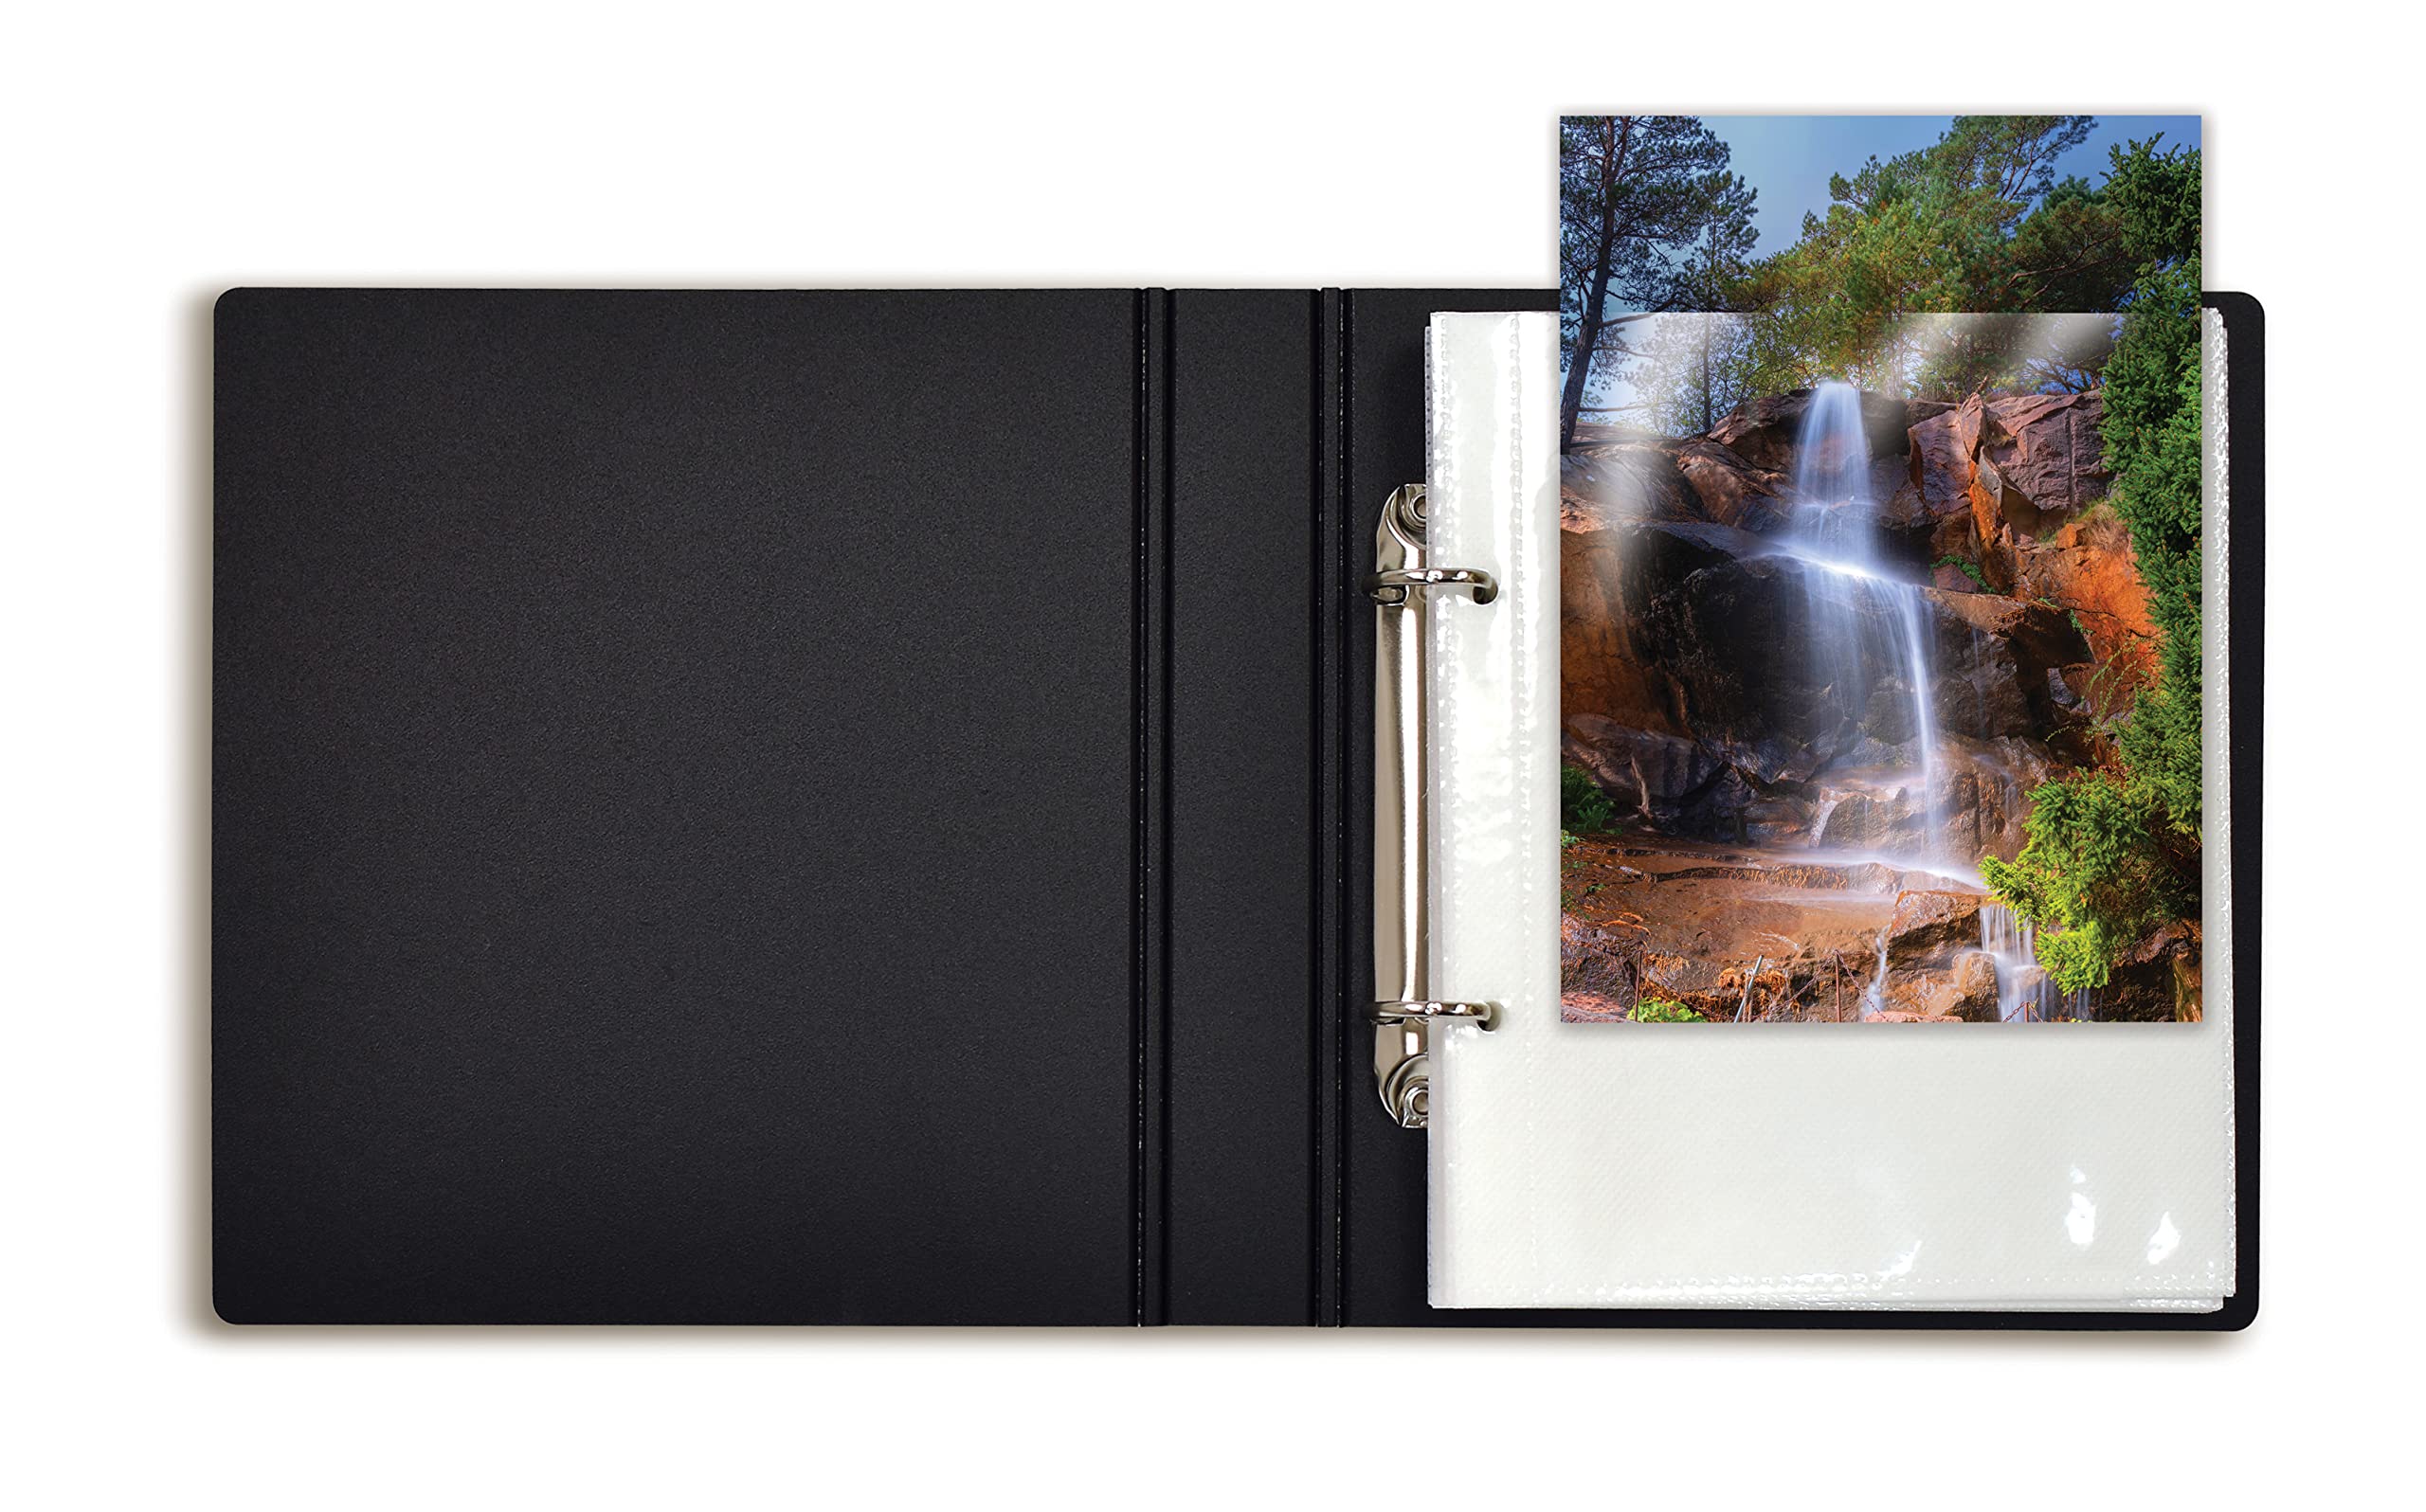 Photo Album for 5x7 Pictures, 2-Ring Mini Hard Cover Photo Binder, Holds 36  5x7 Photos with Clear Heavyweight Pocket Sleeves, by Better Office